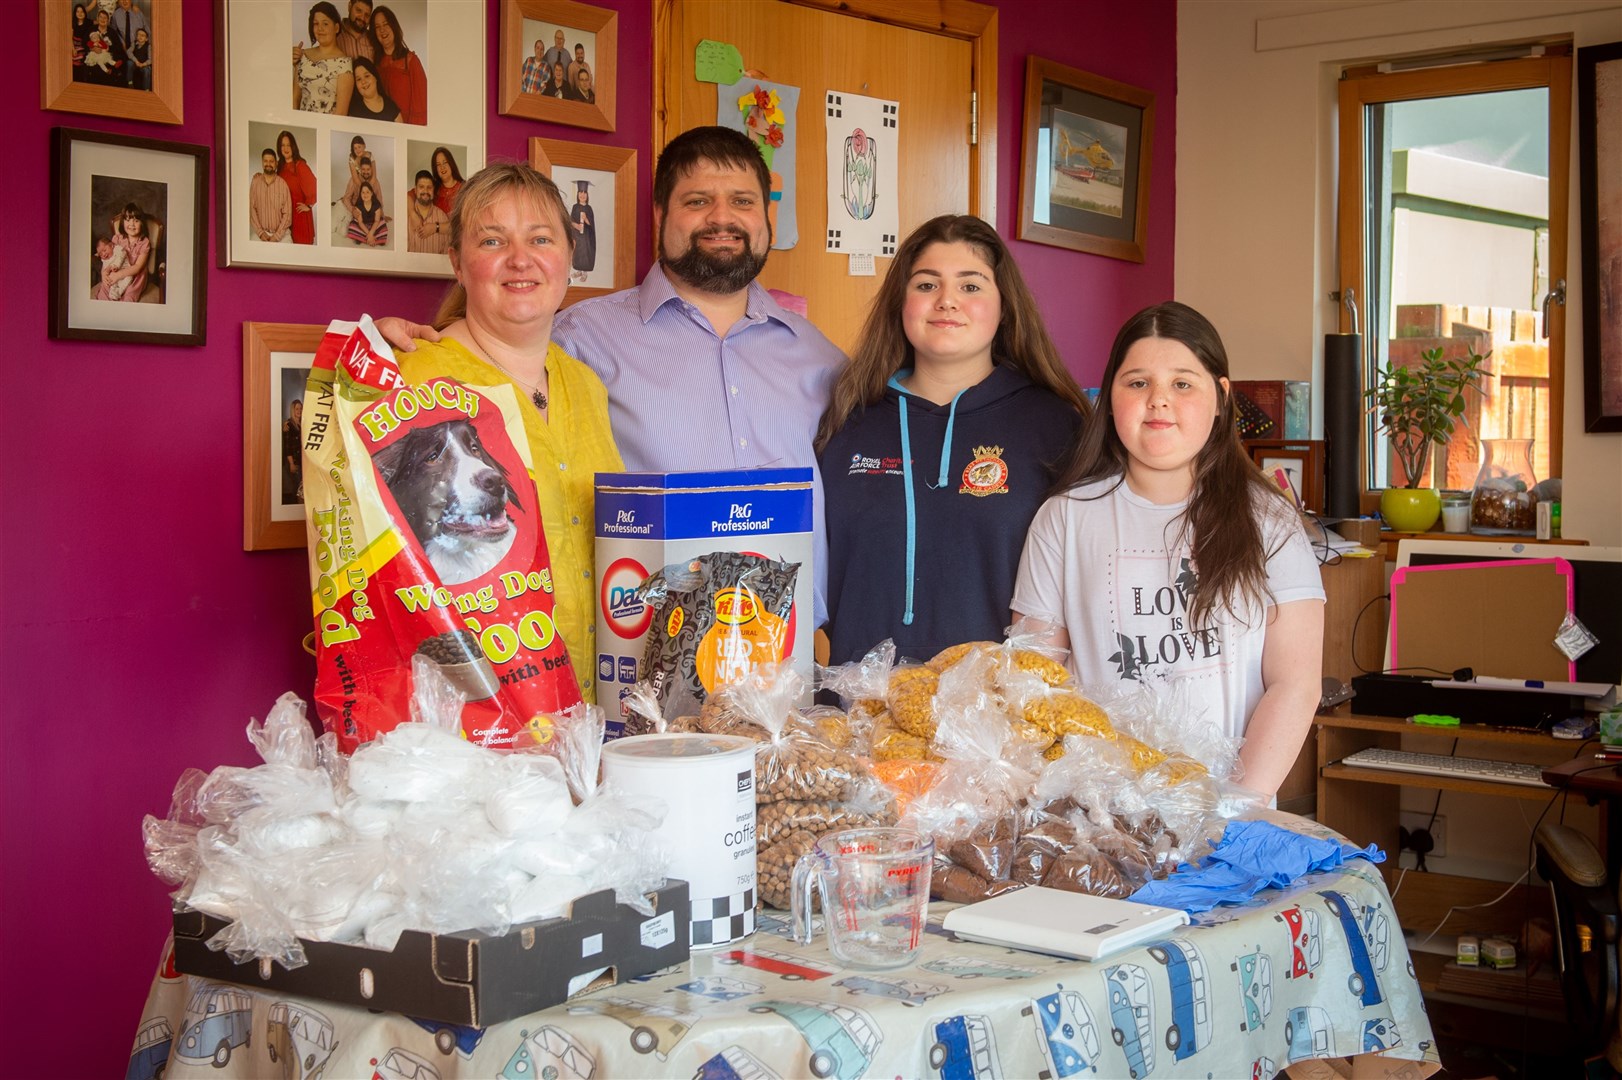 The Food Share Point in Dingwall has been crowdfunding to raise extra cash to buy more to help those hit hard during the lockdown. Fiona Harrison, Andrew Smith, Regan Smith and Darcie Smith sort out some of the items. Picture: Callum Mackay